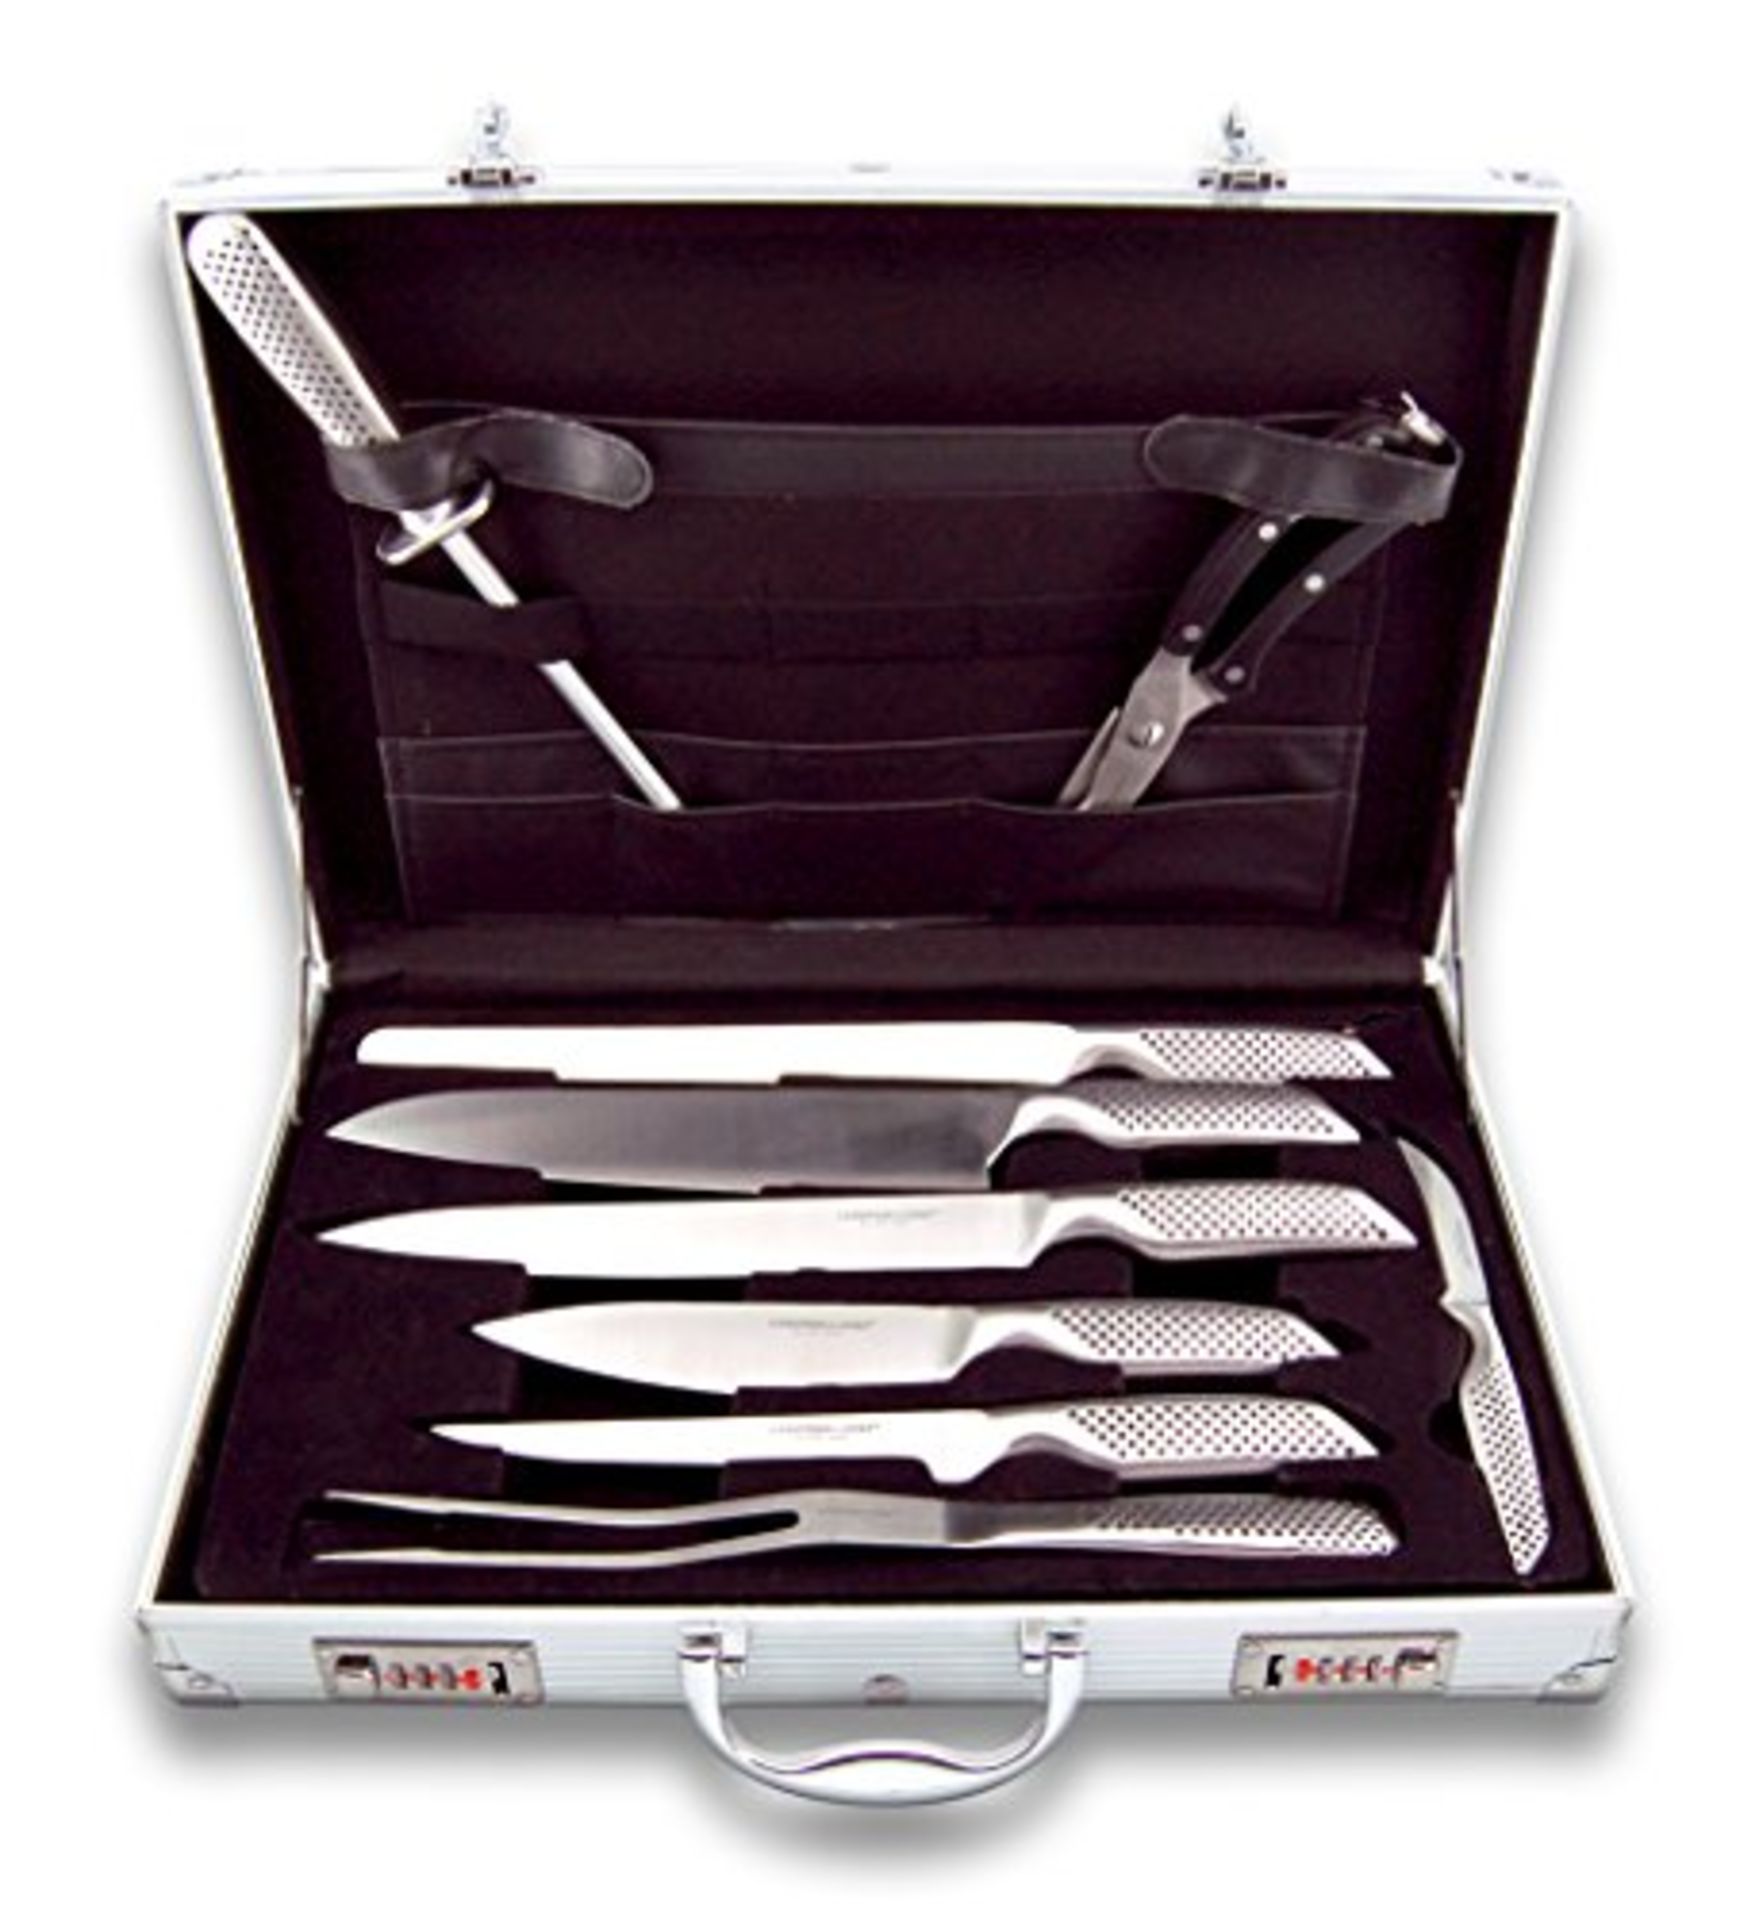 V Brand New Nine Piece Chefs Knife Set In Aluminium Case With Combination Locks Le Couteau Du Chef - Image 2 of 2